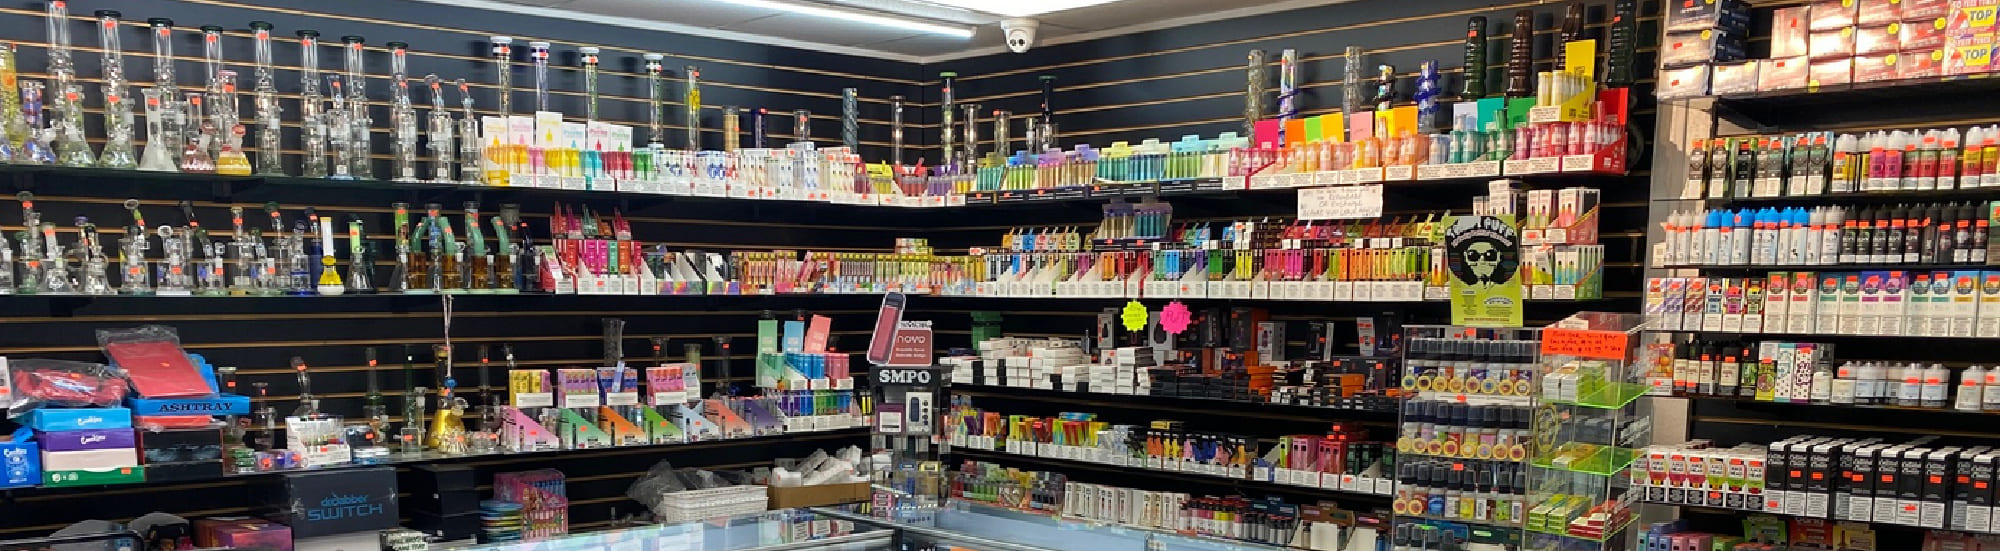 image of j&m smoke shop in clearwater fl